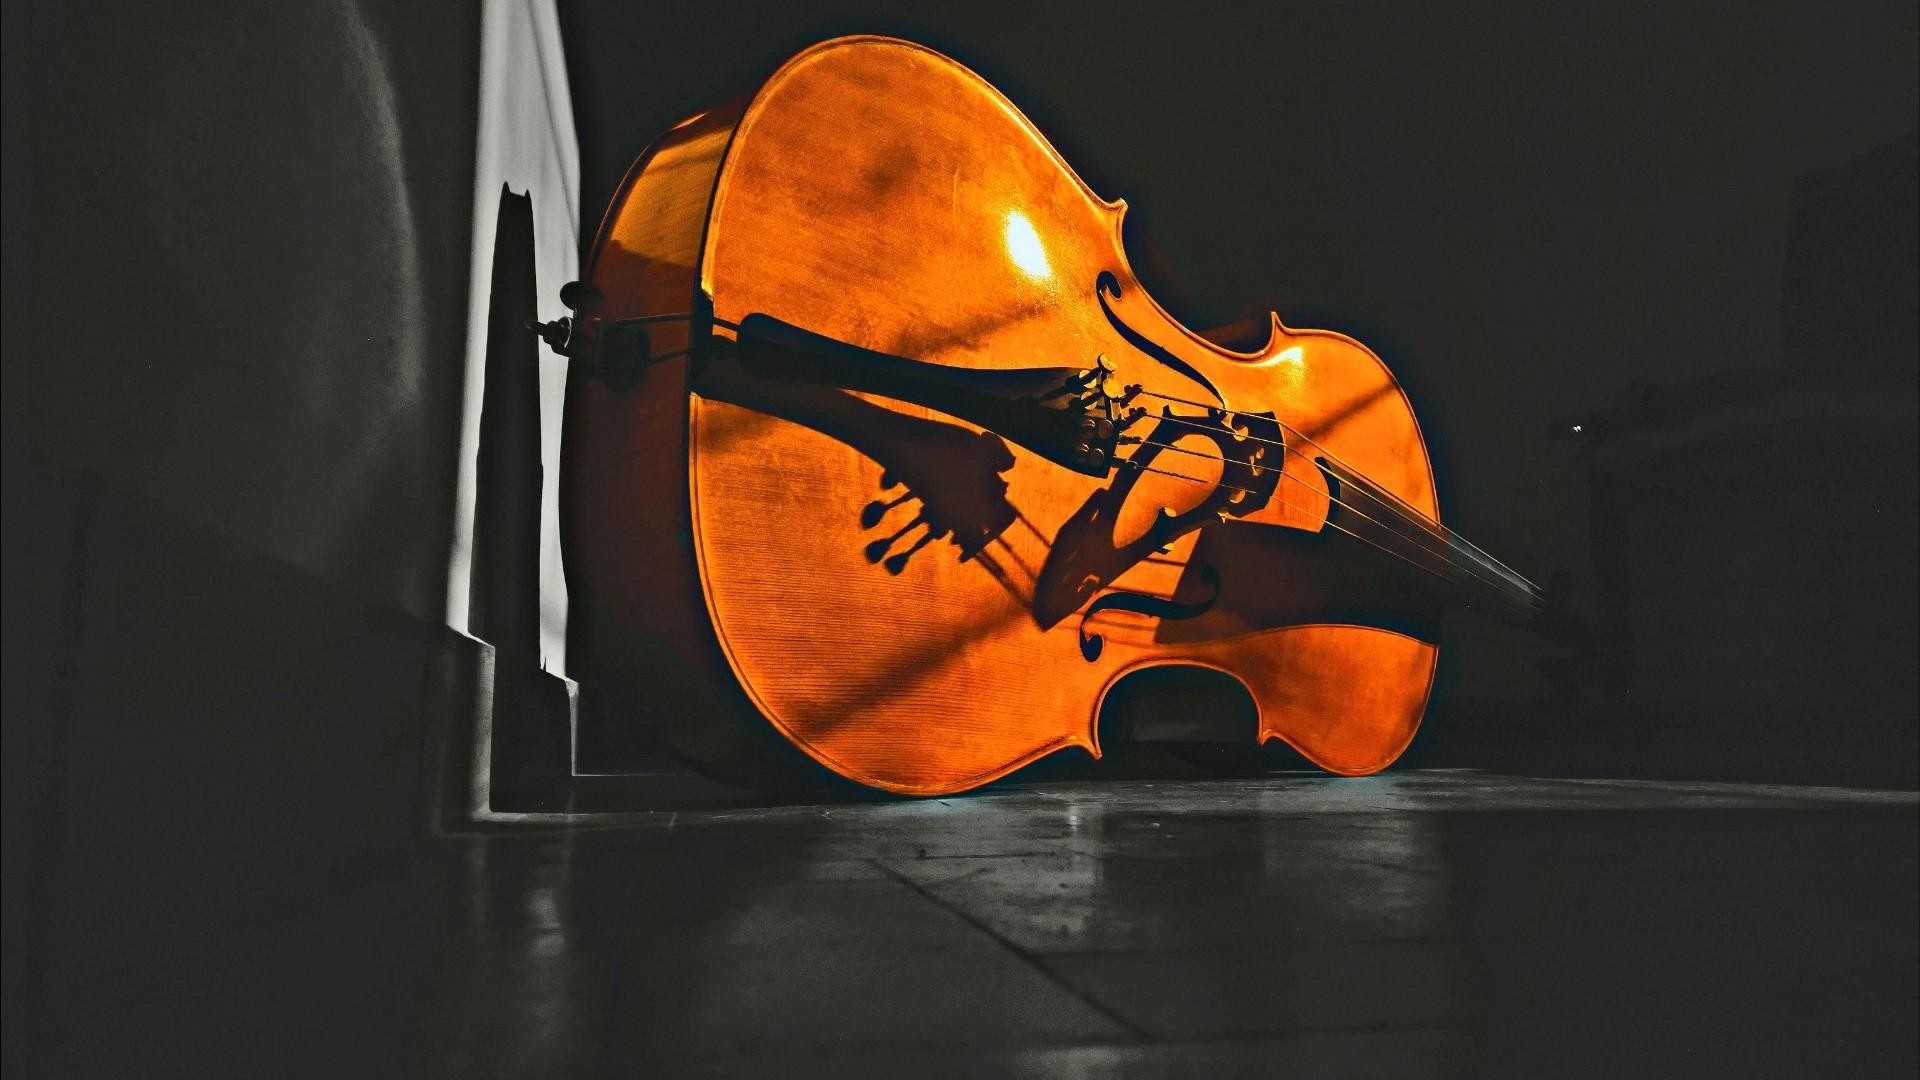 Double Bass: Violin Family, Professional Chordophone, Adjustable Tension Of The Strings, The Soundboard. 1920x1080 Full HD Wallpaper.